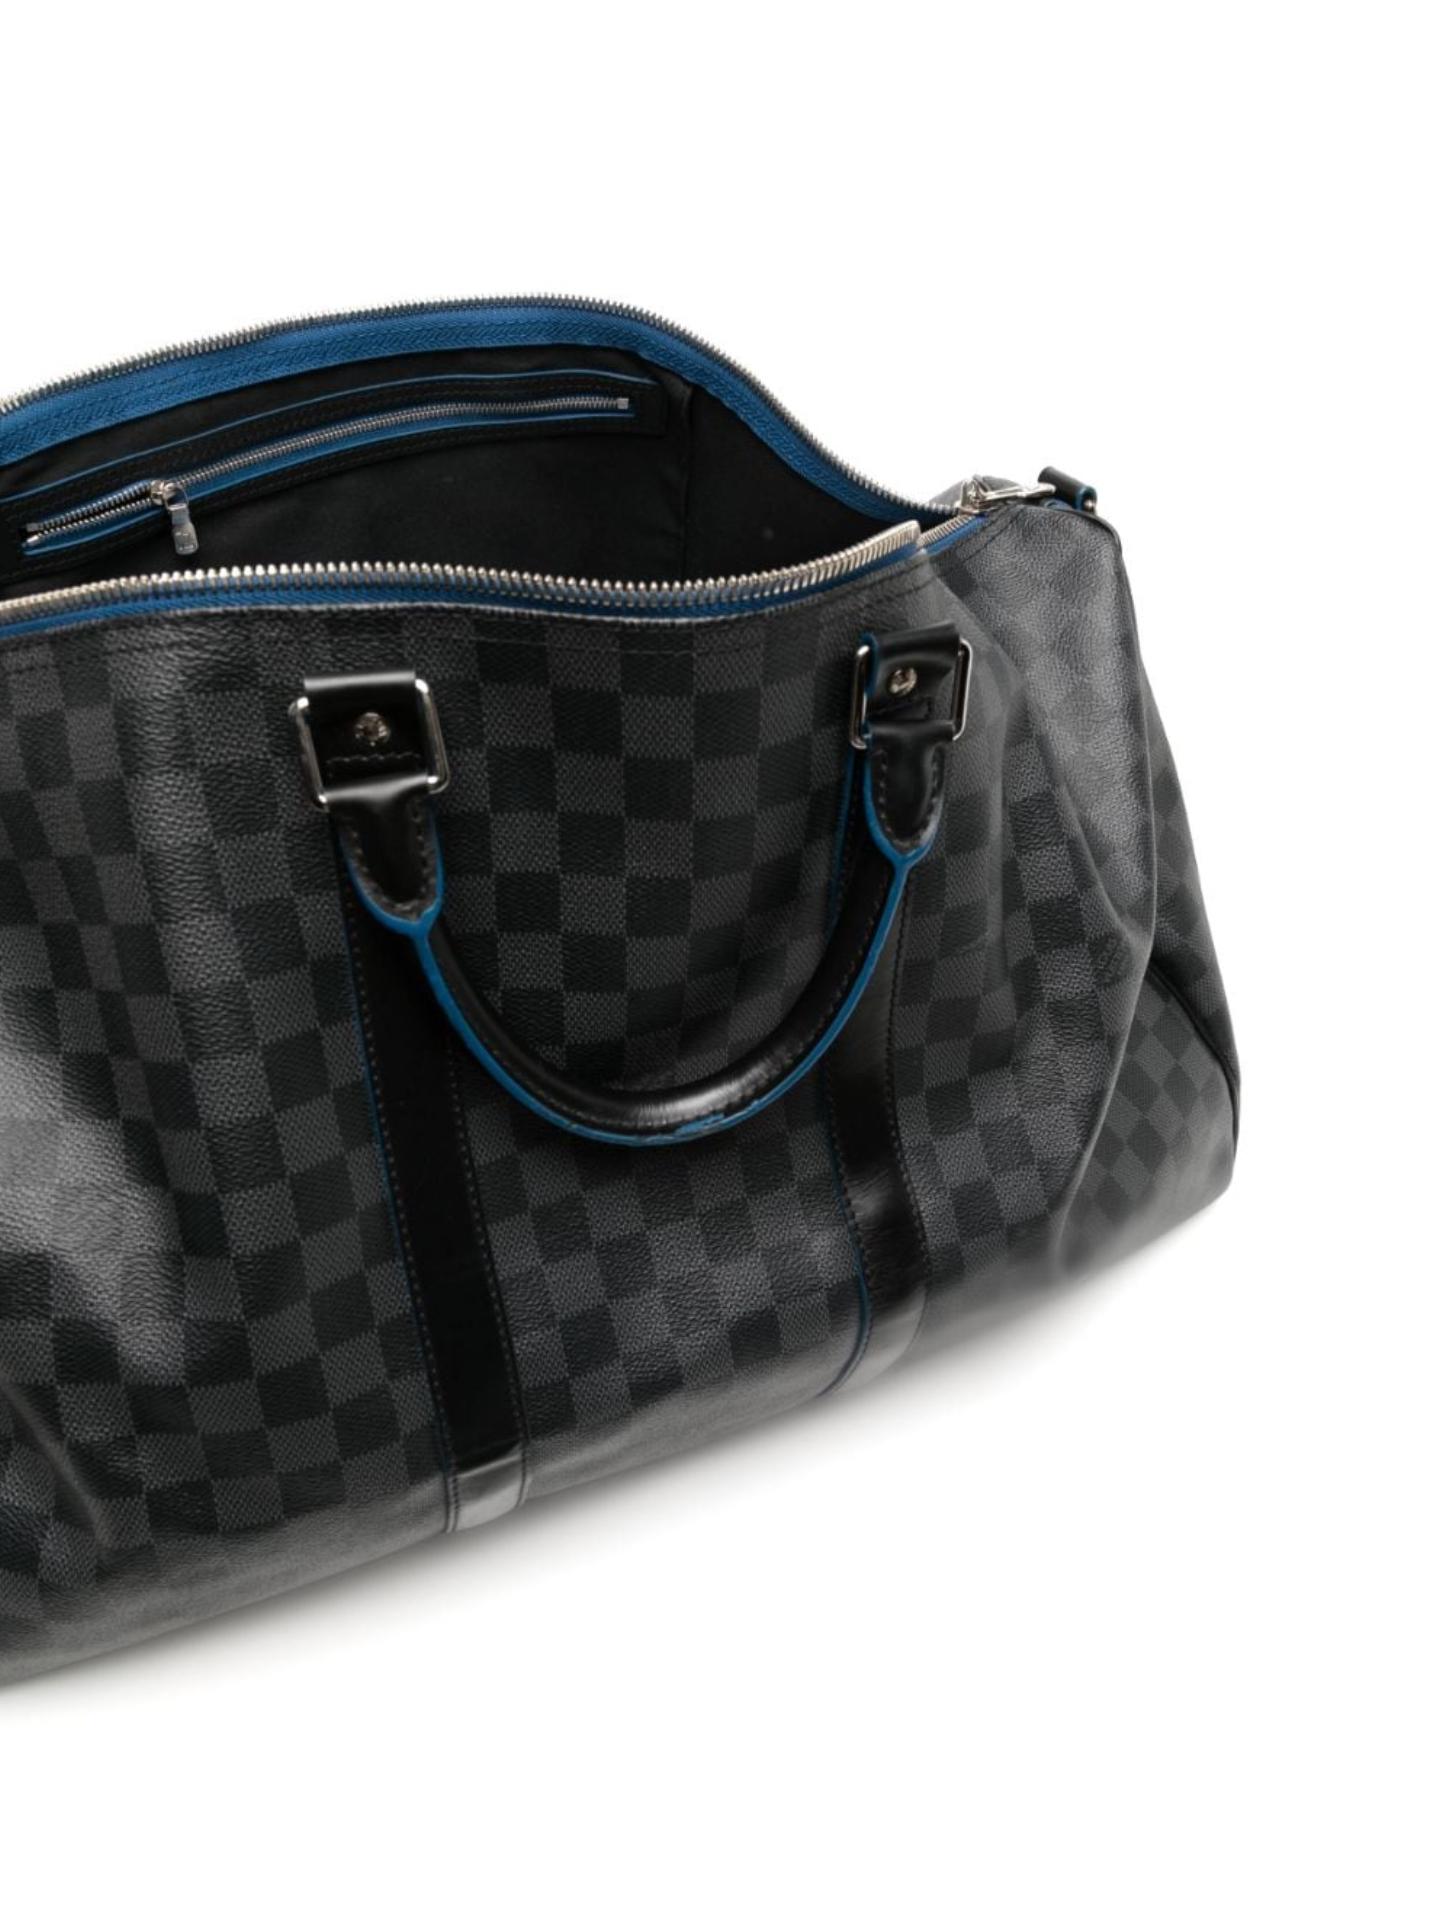 * Black/Grey signature Damier Graphite canvas
* Contrasting blue details
* Leather trim
* Two rolled top handles
* Adjustable detachable shoulder strap
* Two-way zip fastening
* Main compartment
* Internal zip-fastening pocket
* Silver-tone